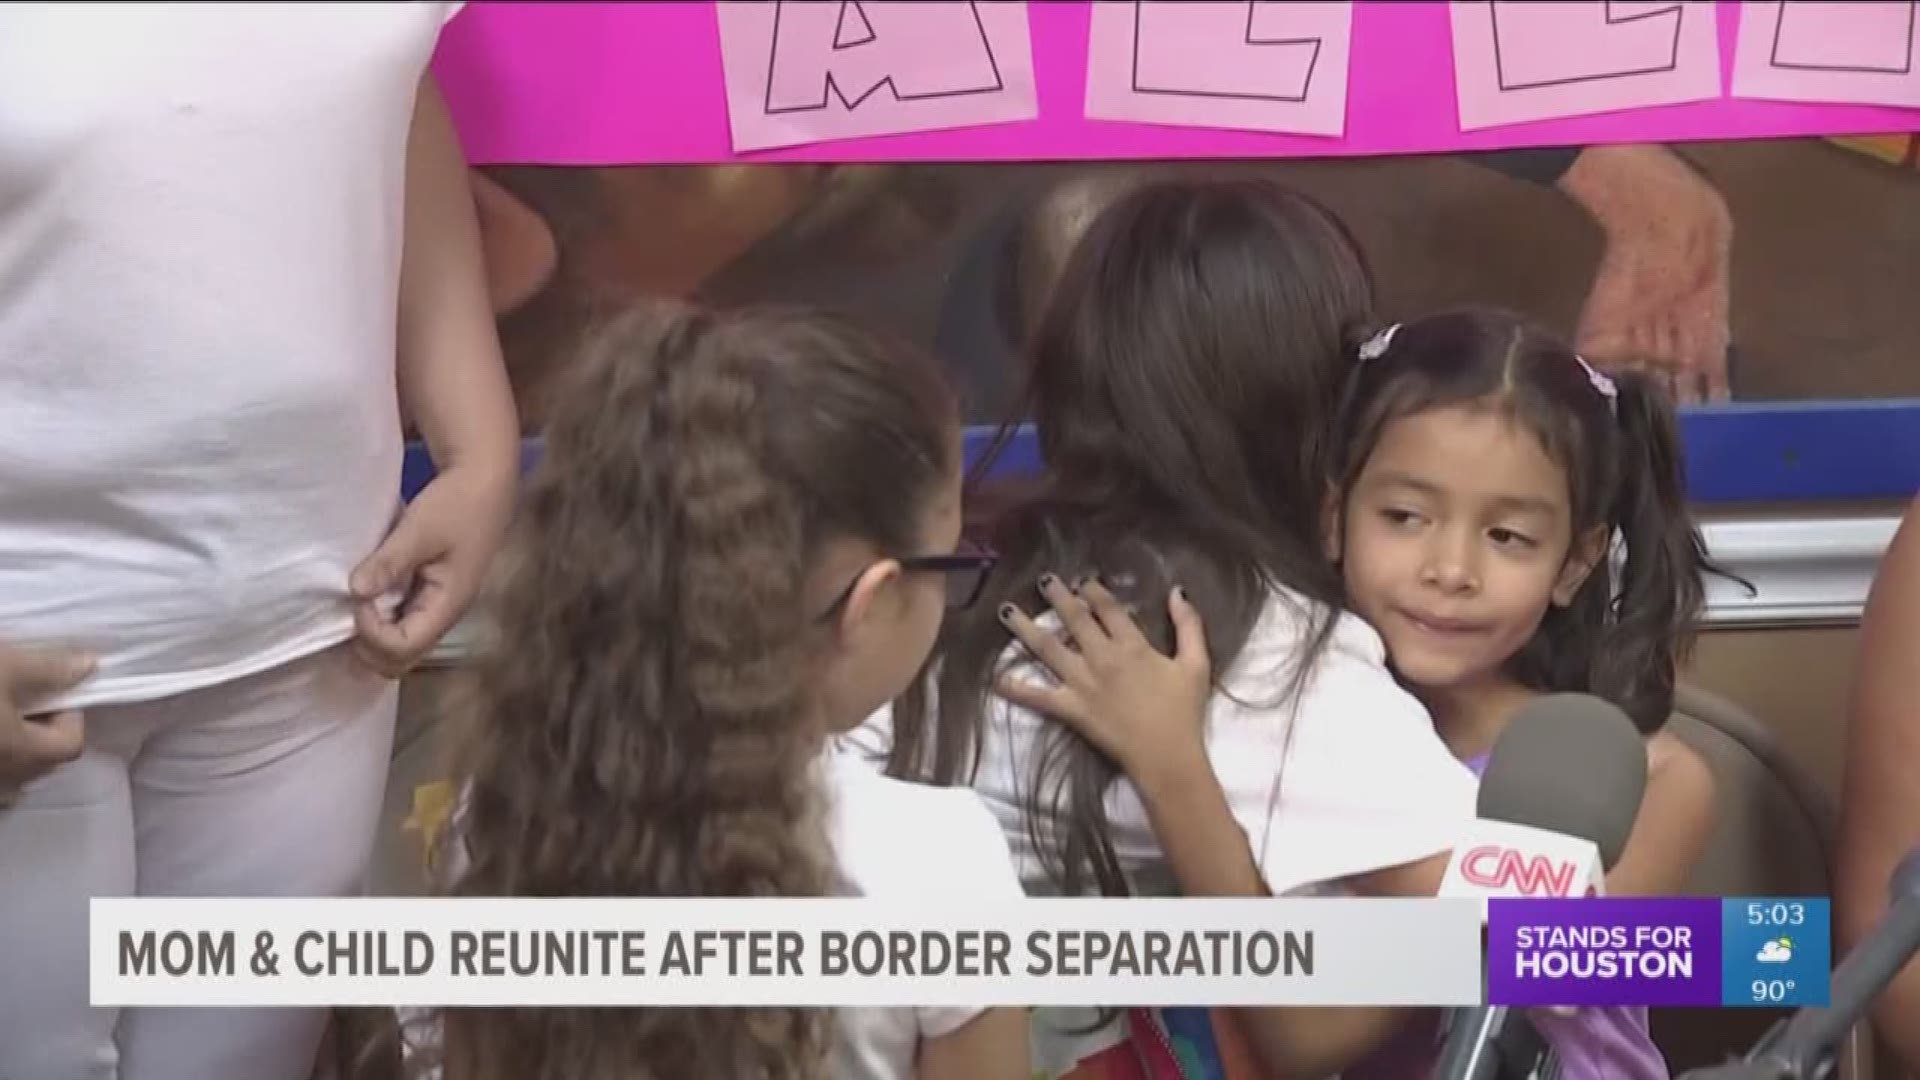 The little girl heard on a heartbreaking recording that drew international outrage on family separations was reunited with her mother Friday morning at Bush Intercontinental Airport in Houston.
Cindy Madrid and her six-year-old daughter, Allison, both fro